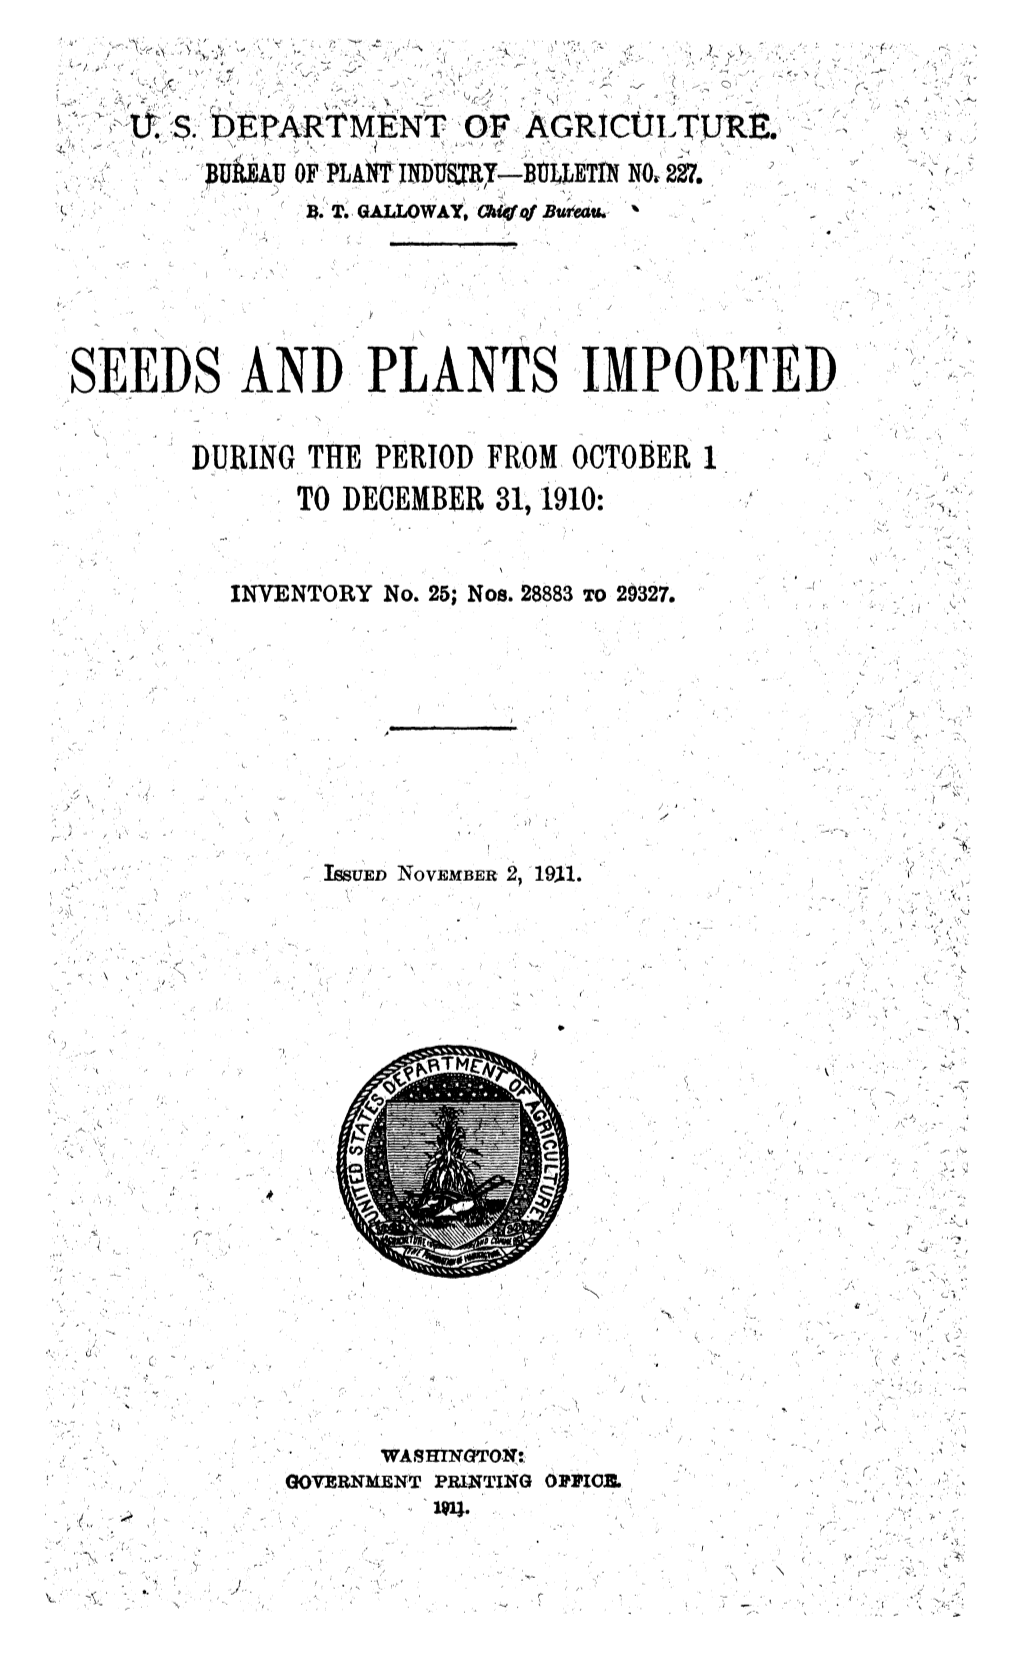 Seeds and Plants Imported During the Period from October 1 to December 31,1910